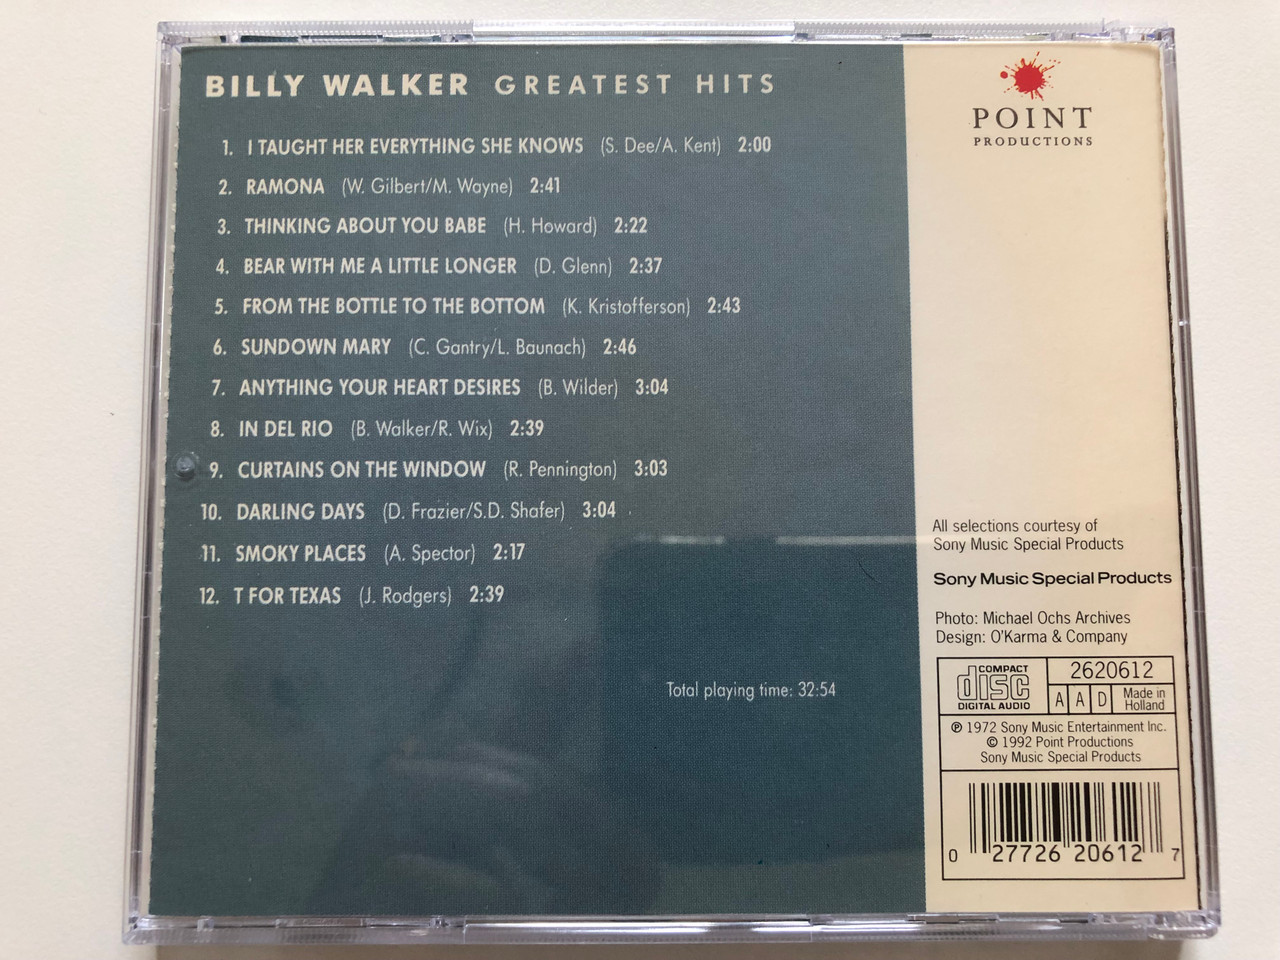 https://cdn10.bigcommerce.com/s-62bdpkt7pb/products/30724/images/181420/Billy_Walker_-_Greatest_Hits_Original_Country_Recordings_Point_Productions_Audio_CD_1992_2620612_4__48937.1623752263.1280.1280.JPG?c=2&_ga=2.137491126.787544708.1623769862-1646000393.1623769862